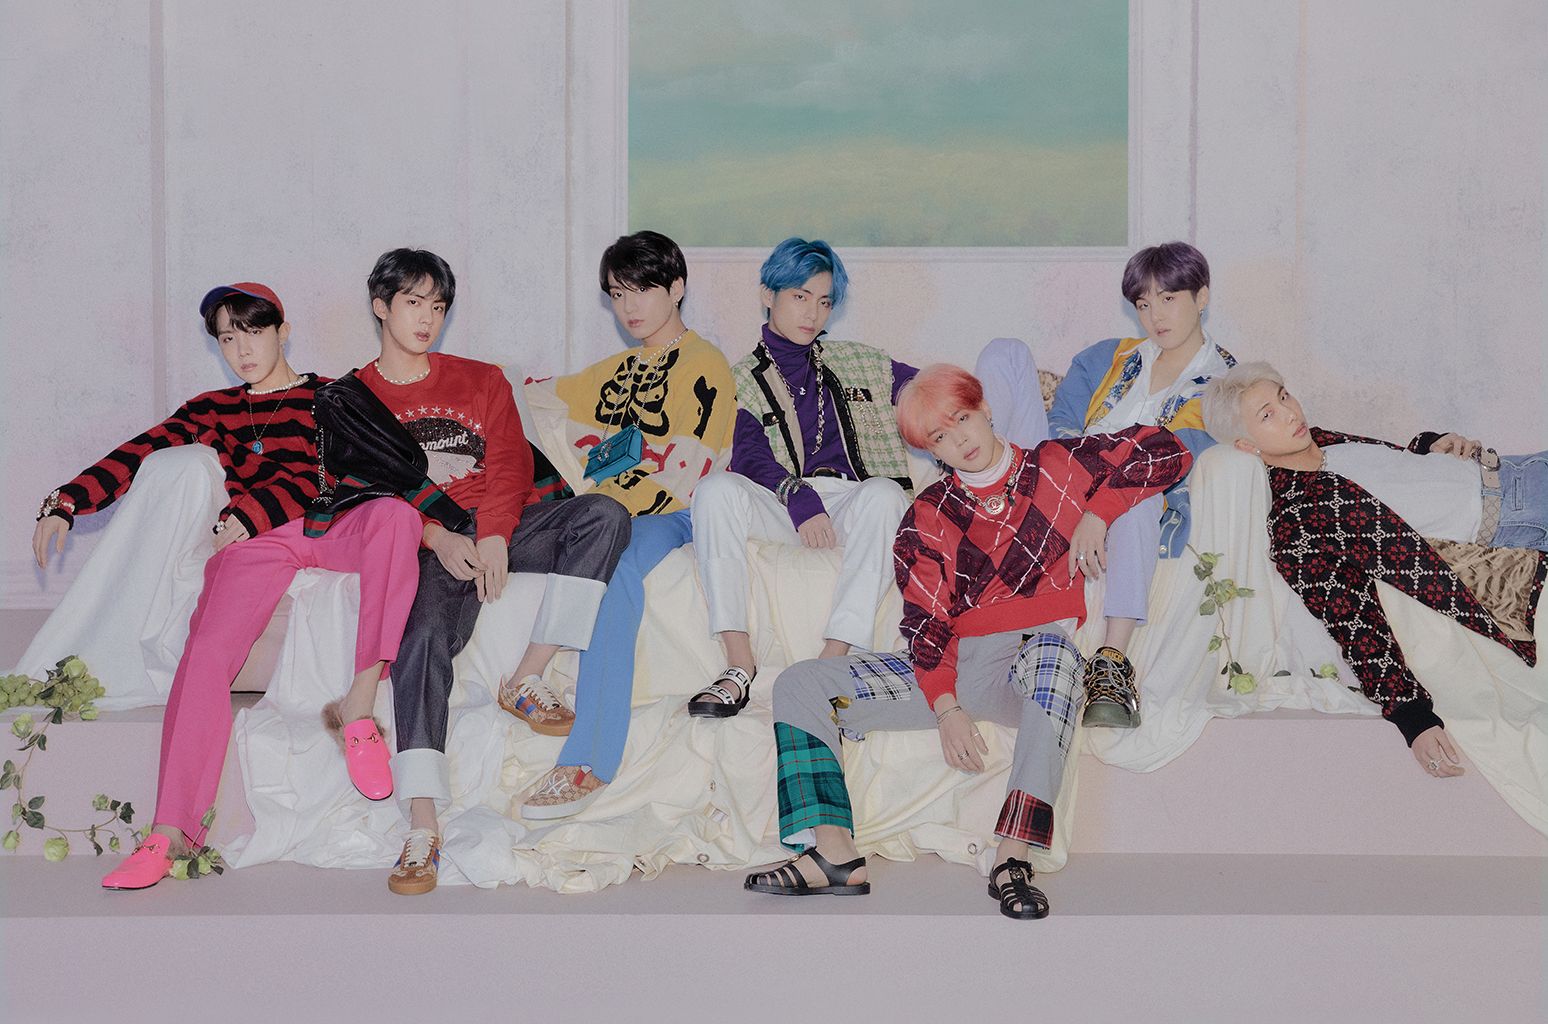 BTS' Epic Music Video for 'Make It Right' With Lauv Is a Homage to